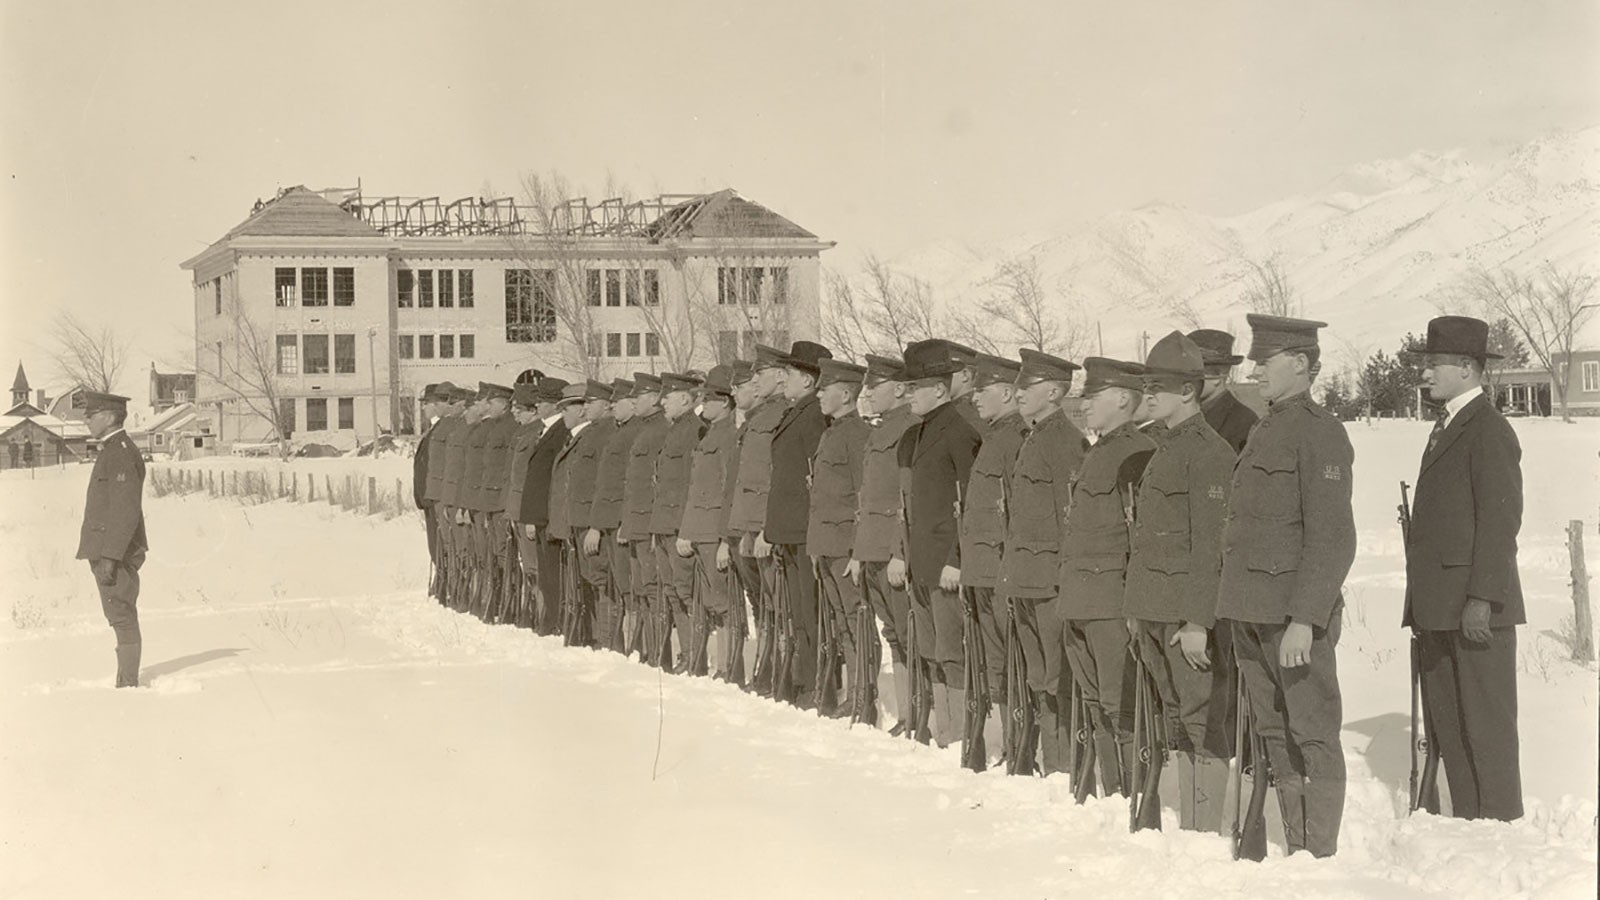 ROTC military formation on the Quad, 1918.